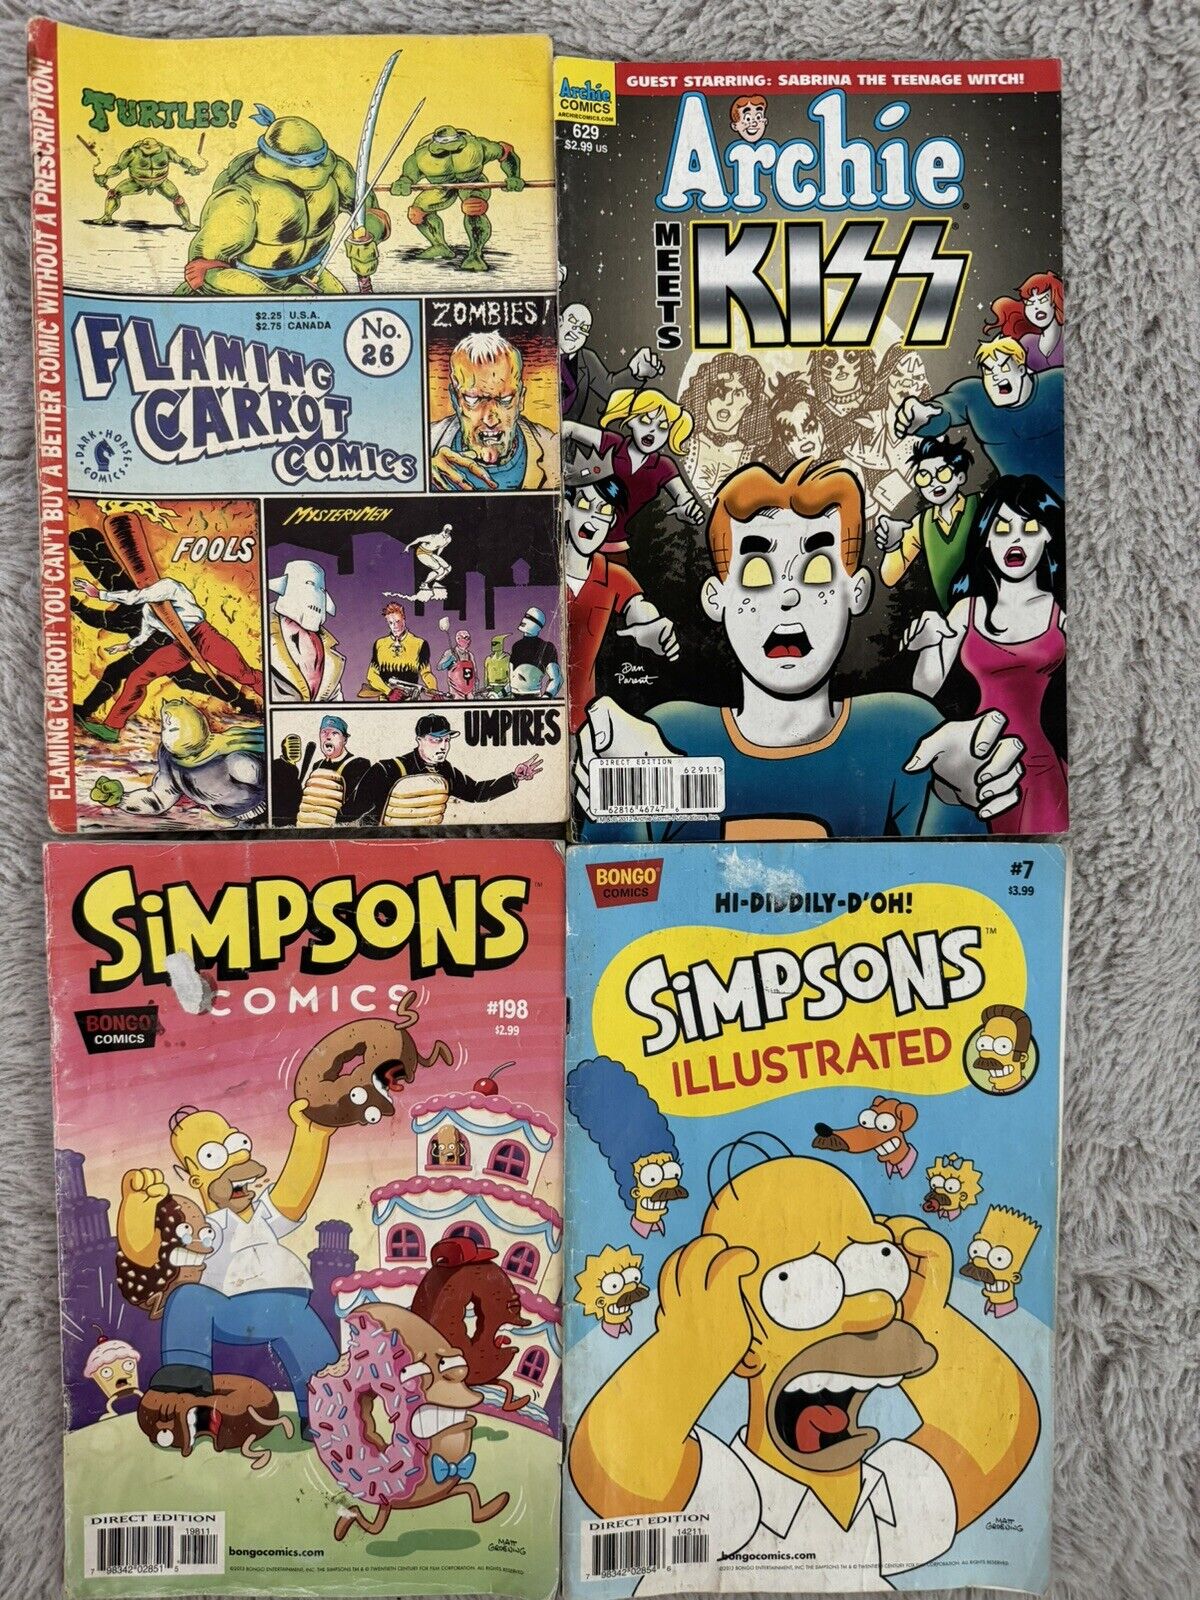 Simpsons Comics /Illustrated Hi-Diddily-D’oh Archie Kiss / Flaming Carrots Comi